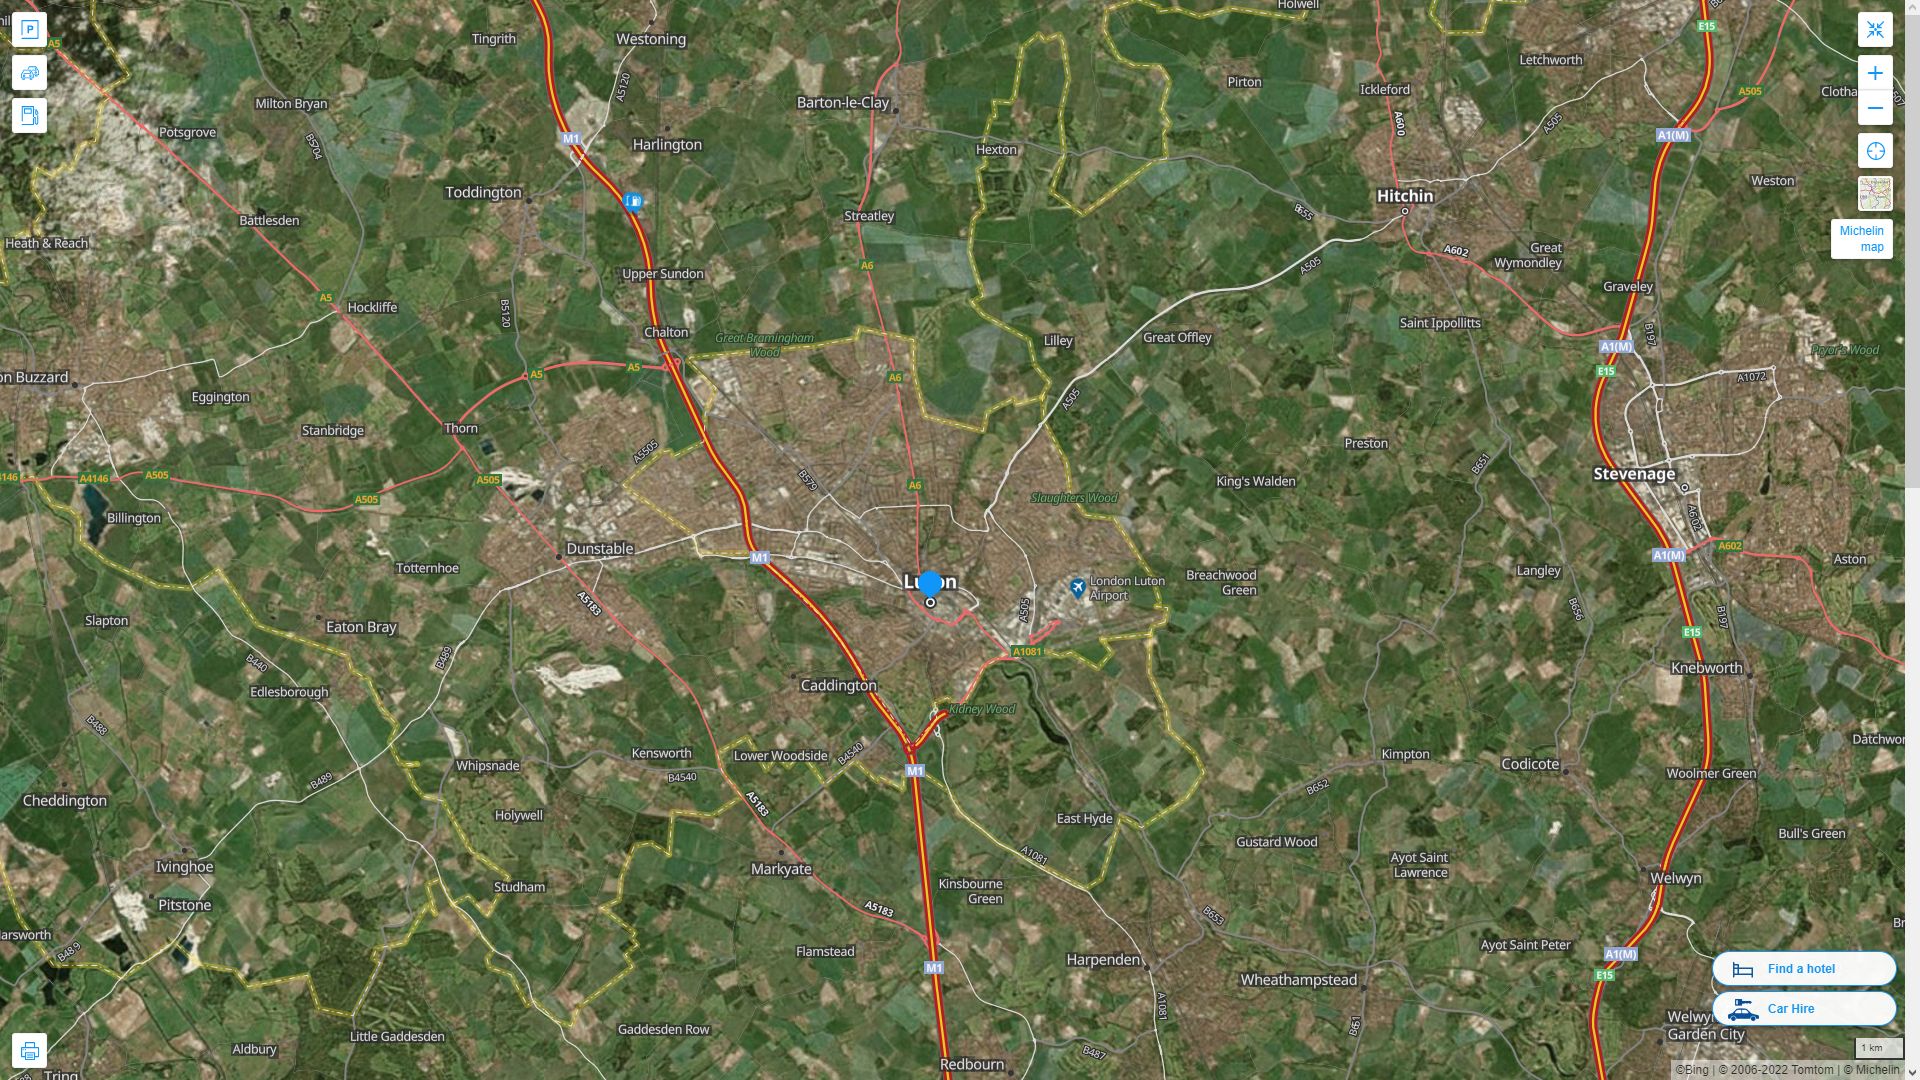 Luton Highway and Road Map with Satellite View